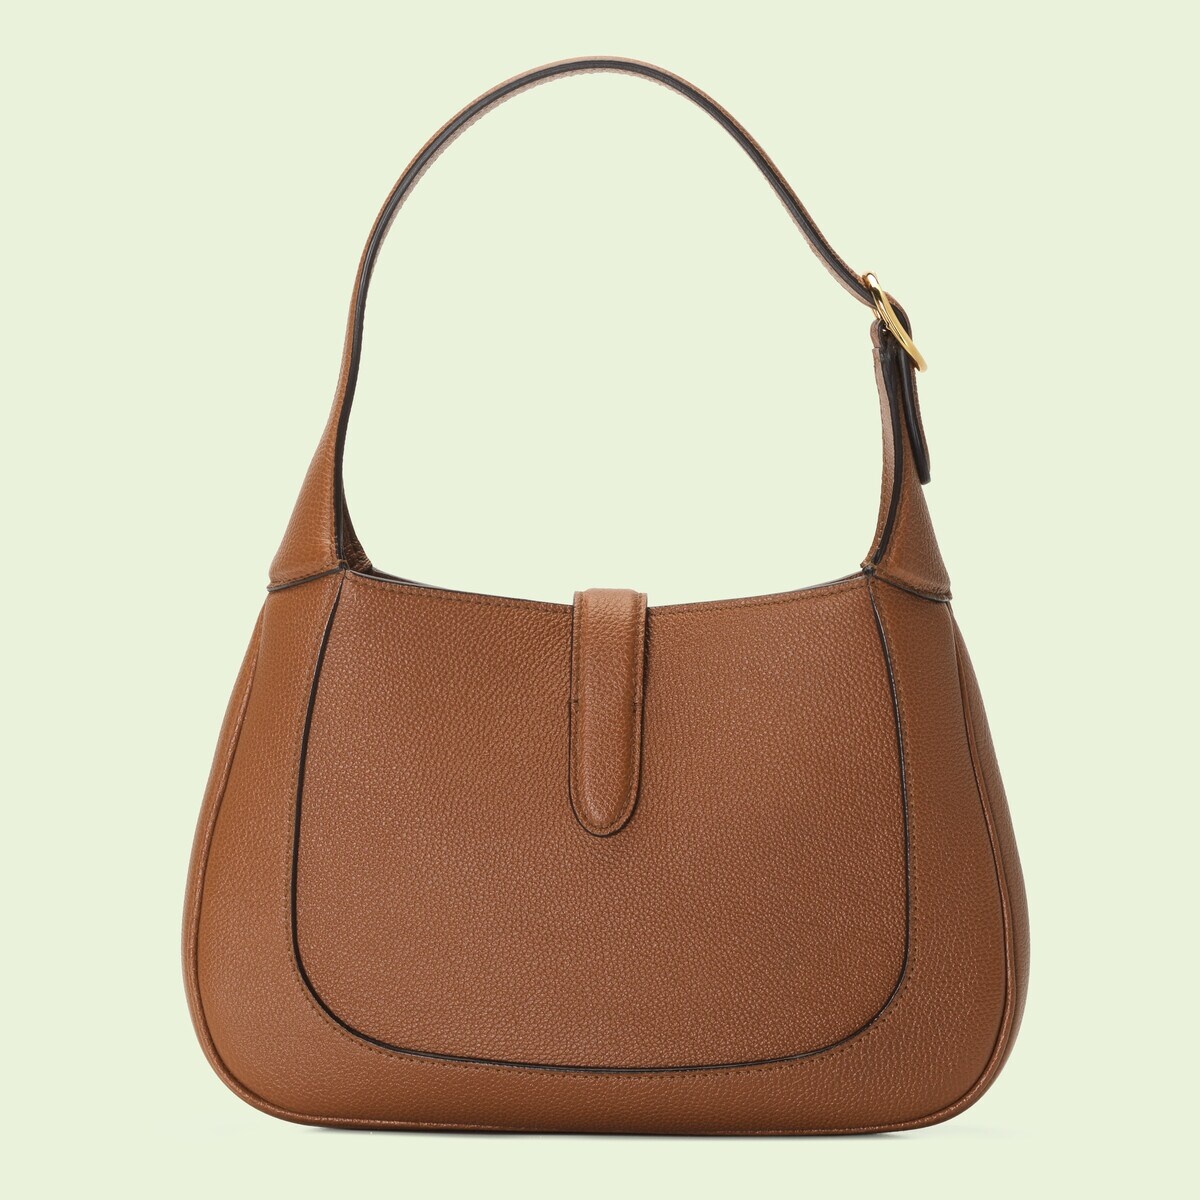 Jackie 1961 small natural grain bag in red leather